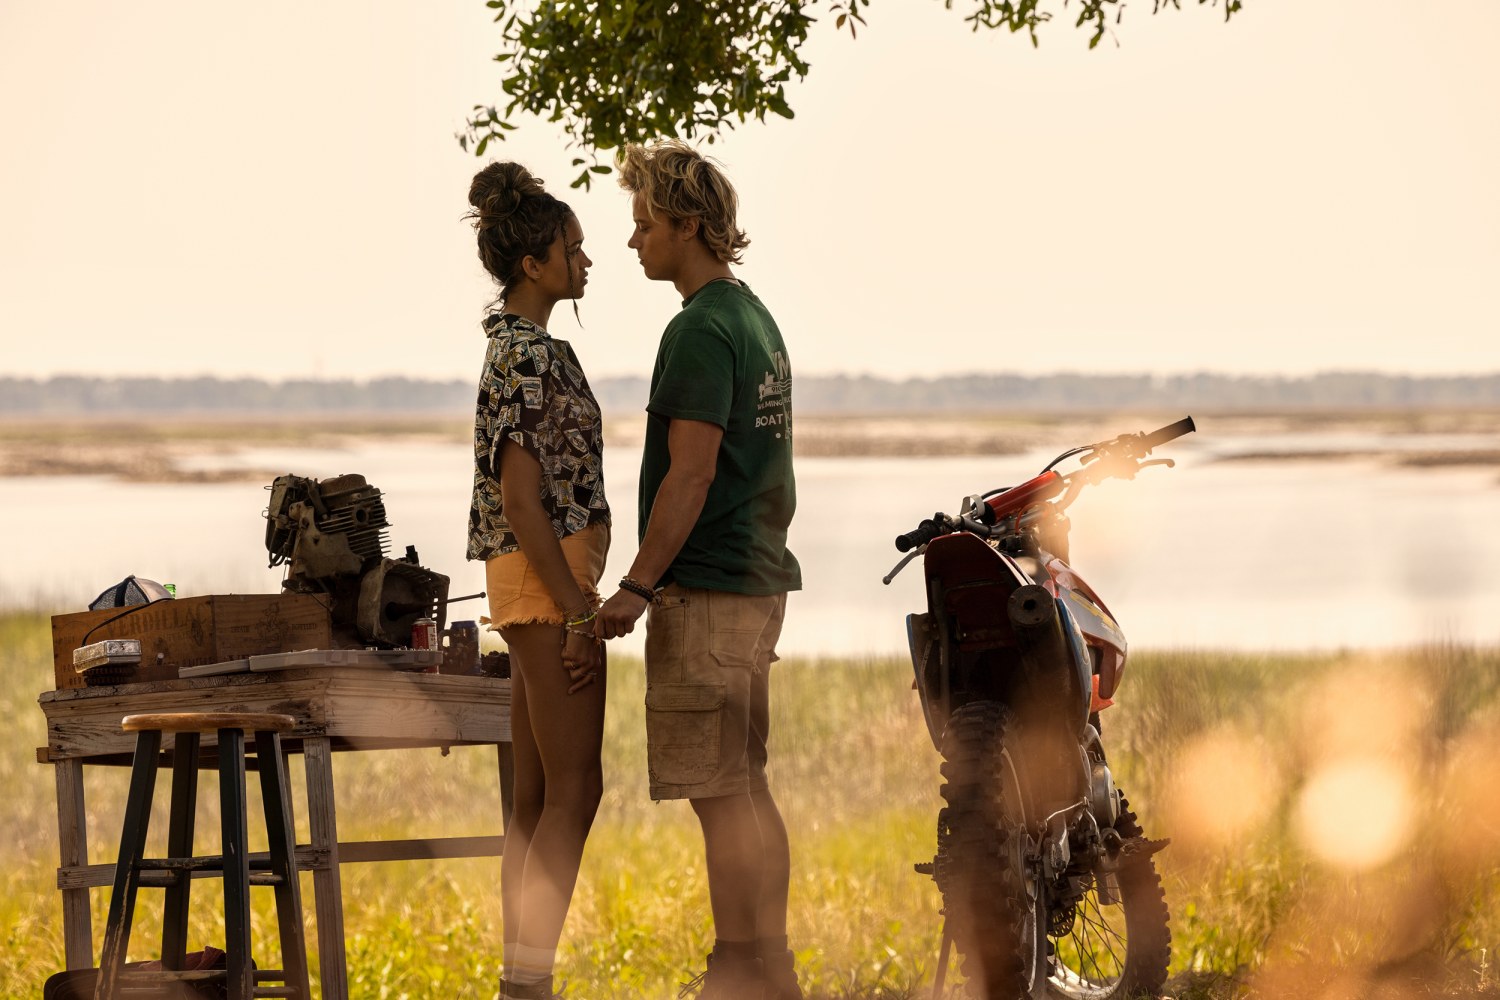 Outer Banks Season 2 Netflix Release Date, Cast And Plot - What We